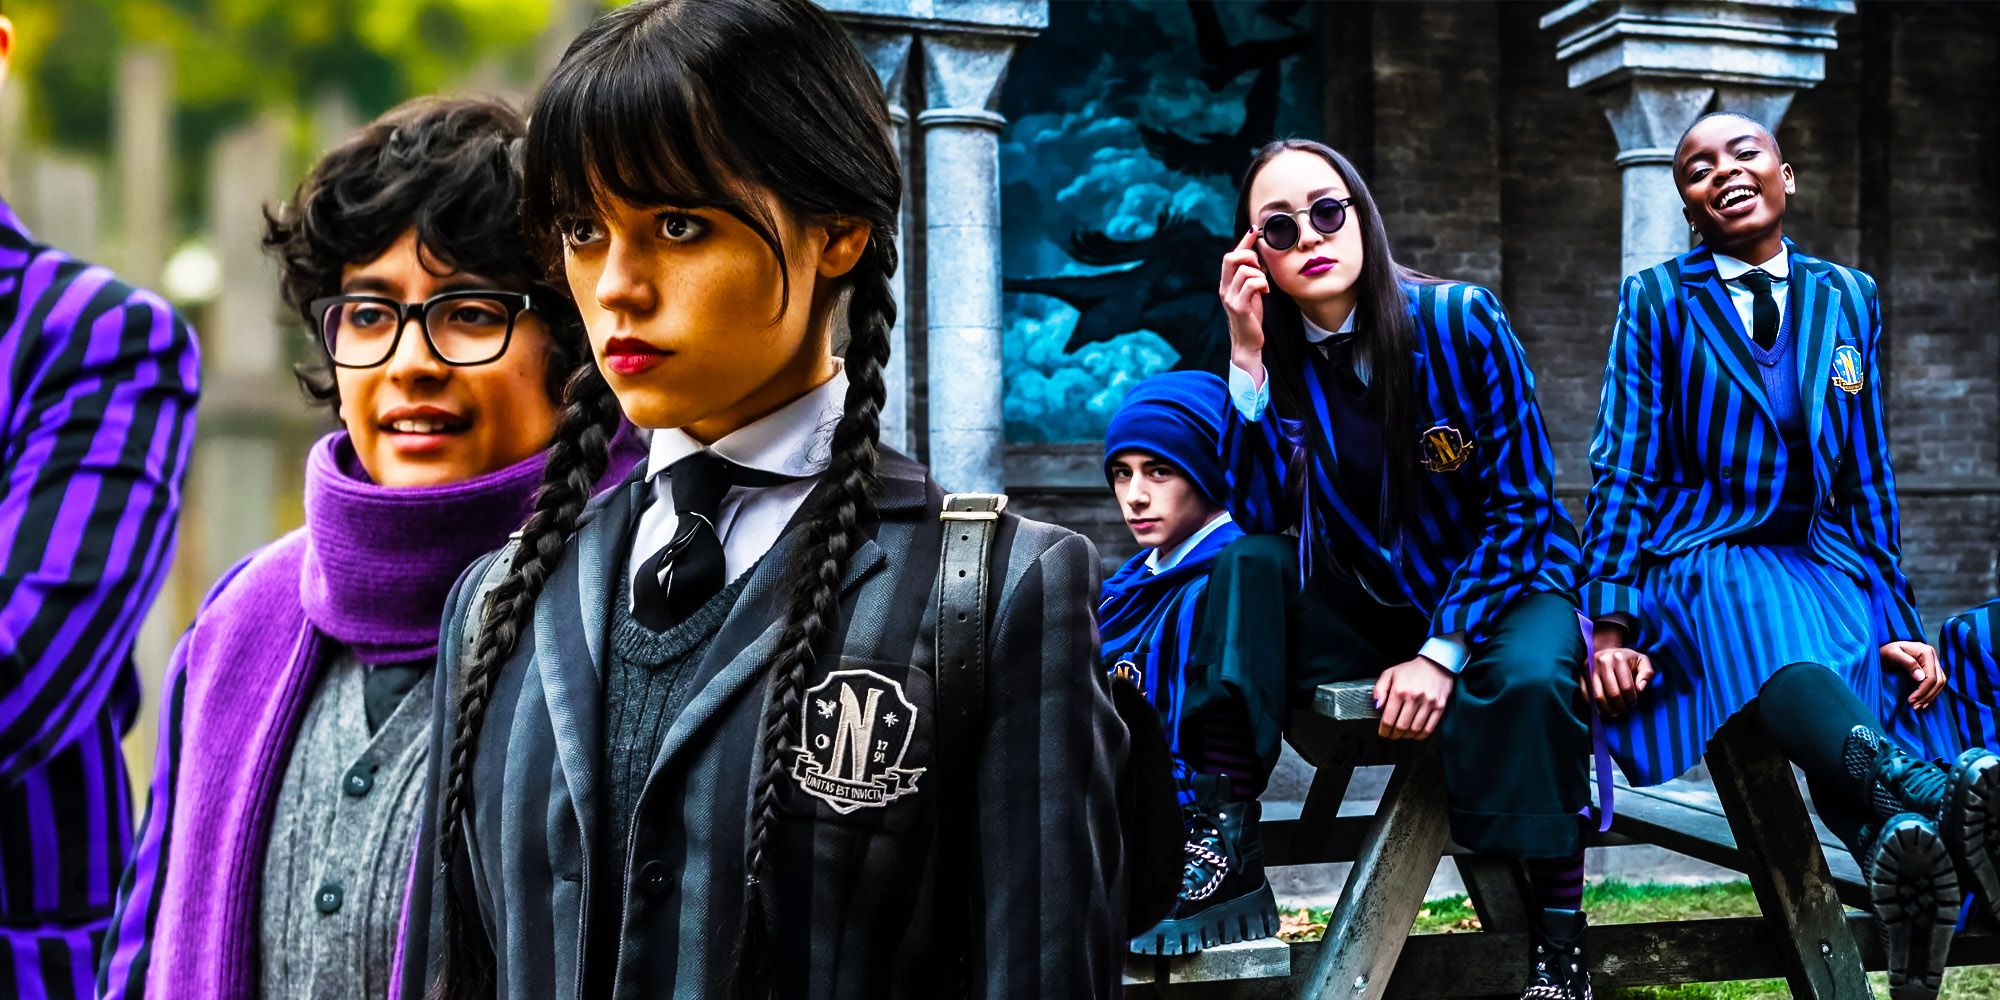 So, What Exactly Are Wednesday Addams' Powers & Has She Always Had Them? -  Capital